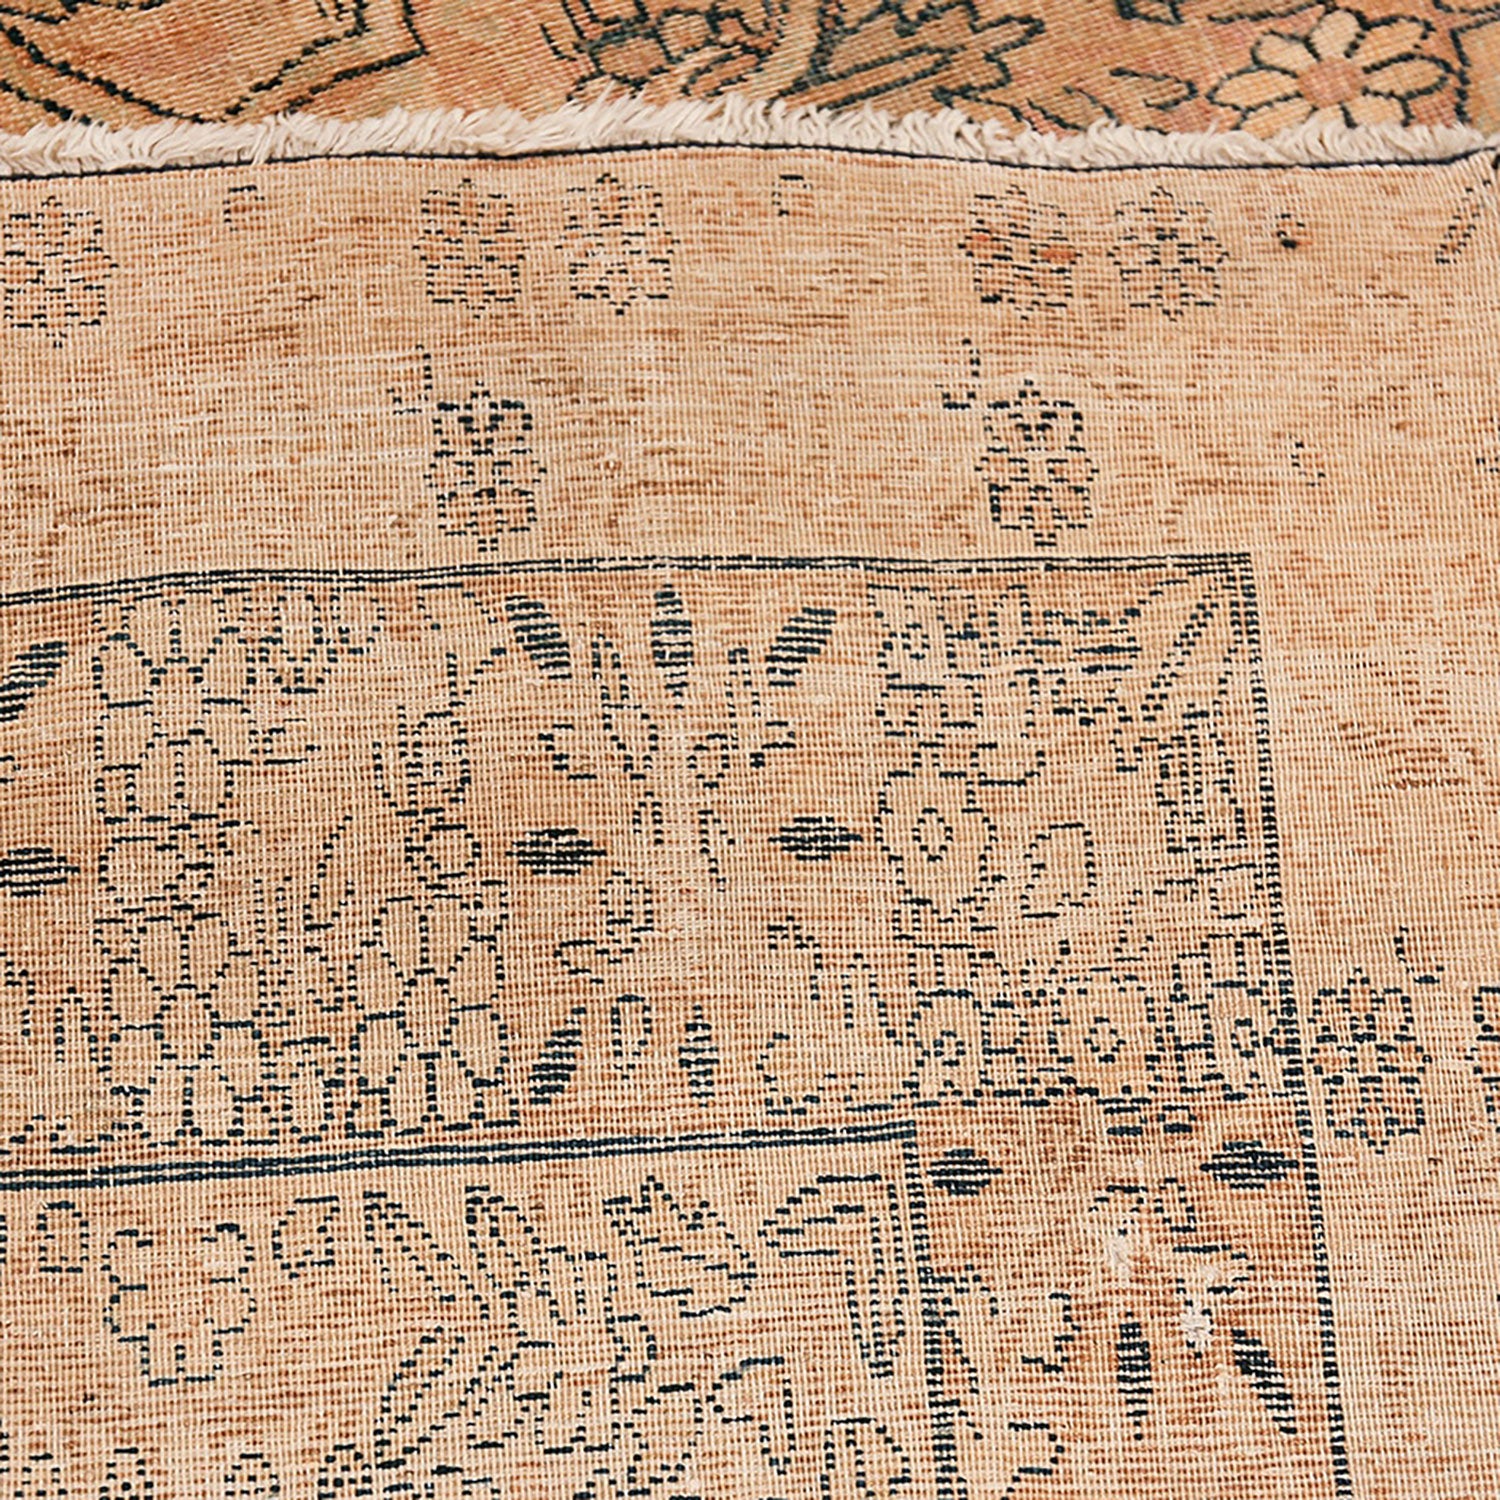 Close-up of a high-quality woven rug with floral and geometric patterns.